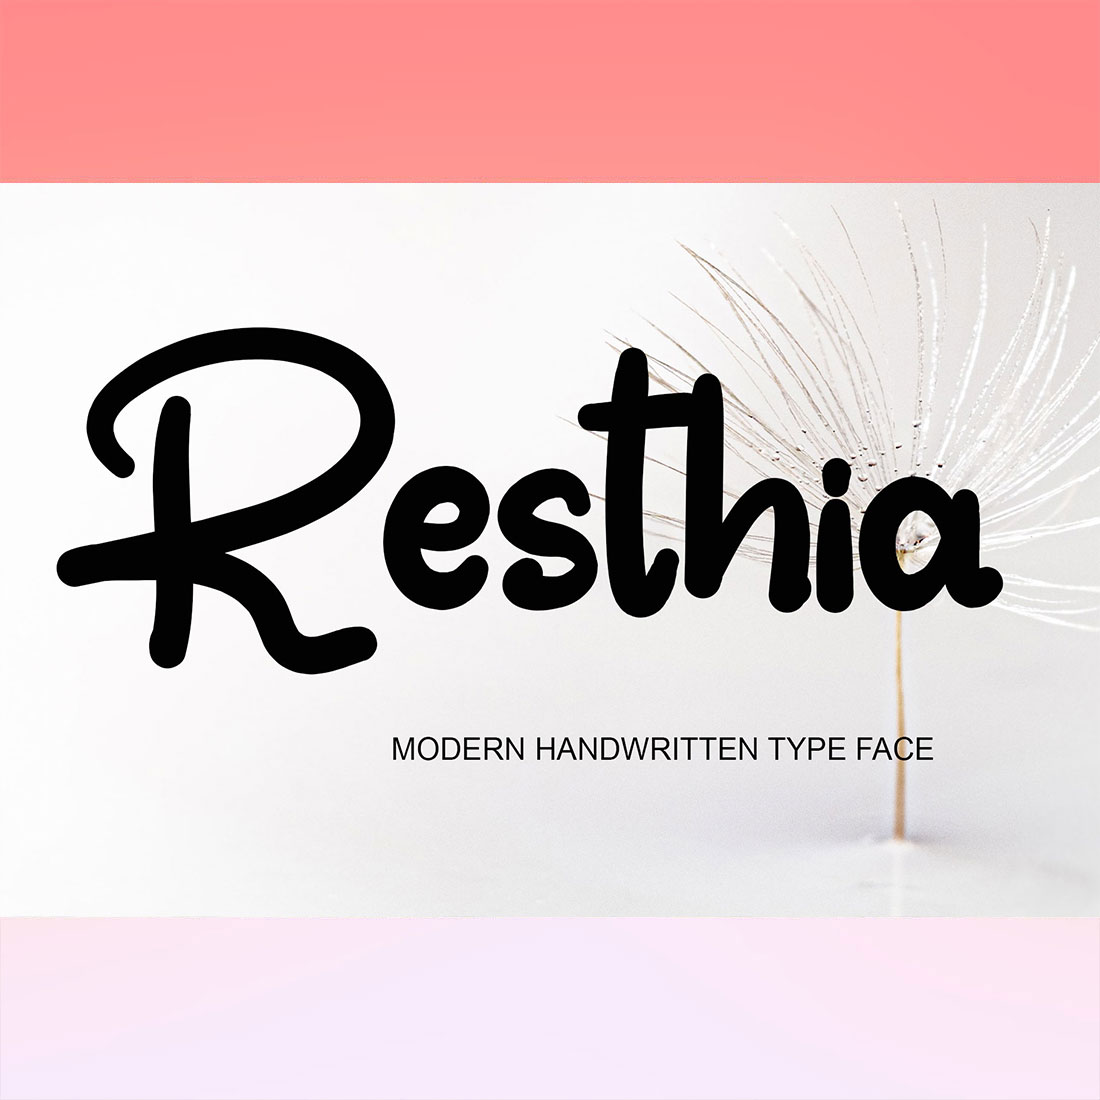 Resthia-only$6 cover image.